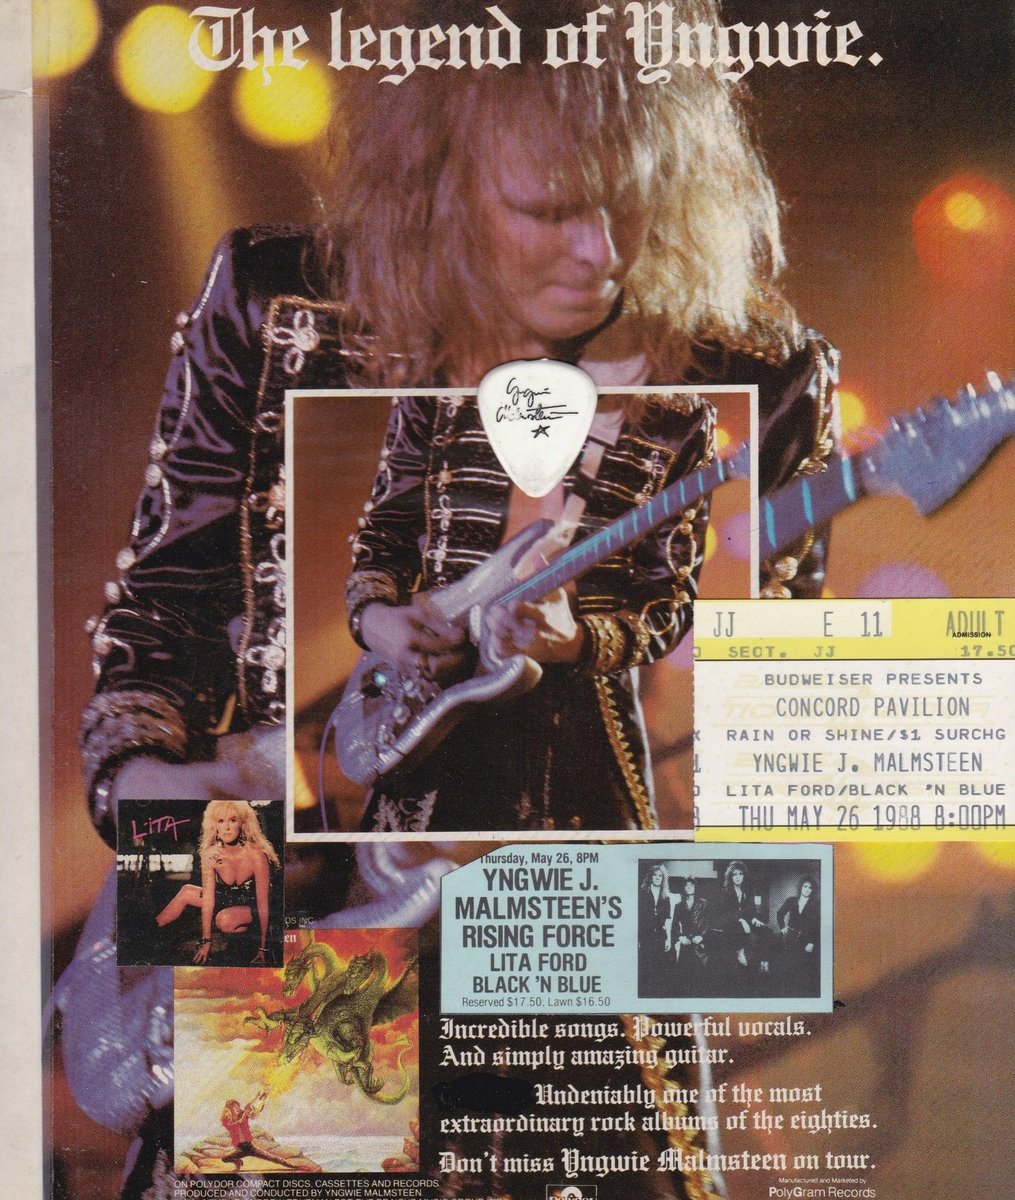 Yngwie J. Malmsteen Concert & Tour History | Concert Archives